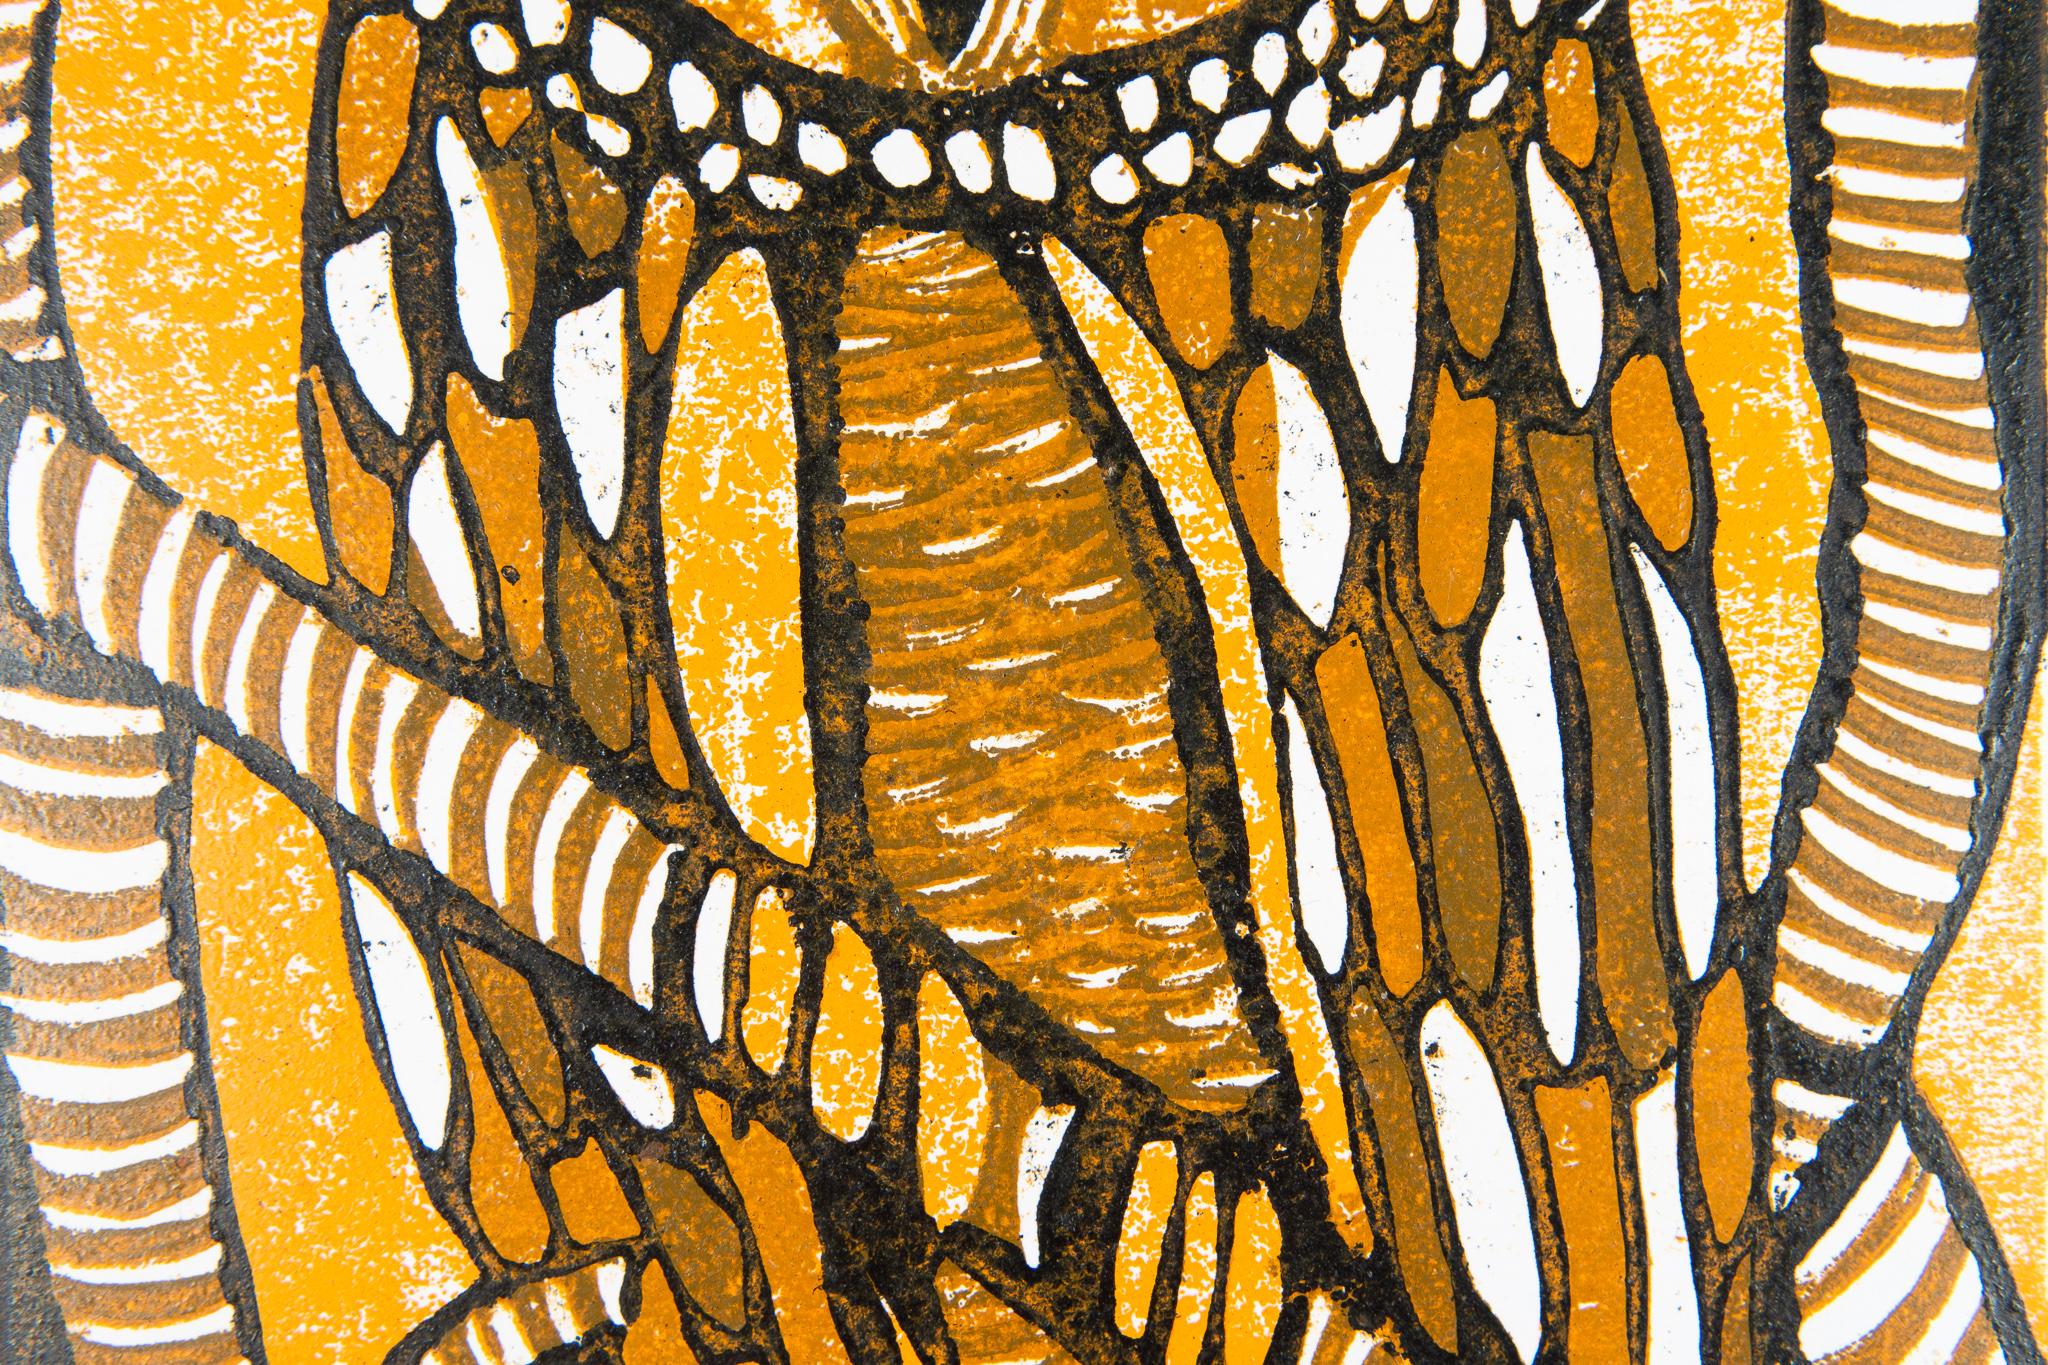 Long Eared Owl, 2009. Cardboard print on paper. Edition of 10.

Elia Shiwoohamba was born in 1981 in Windhoek, Namibia. He graduated from the John Muafangejo Art Centre in Windhoek in 2006. Specialising in printmaking and sculpture, Shiwoohamba